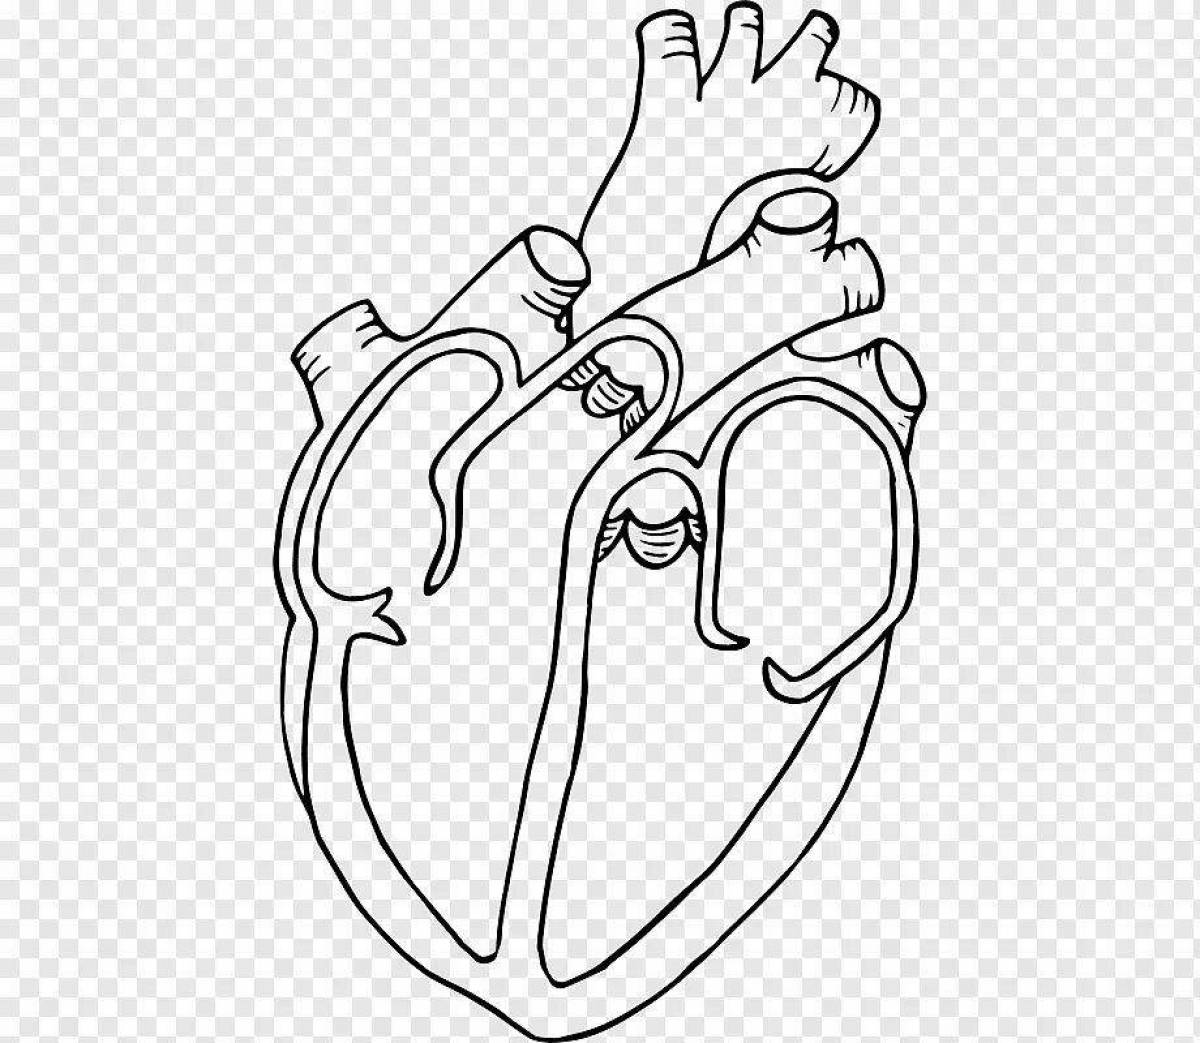 Coloring artistic anatomy of the heart